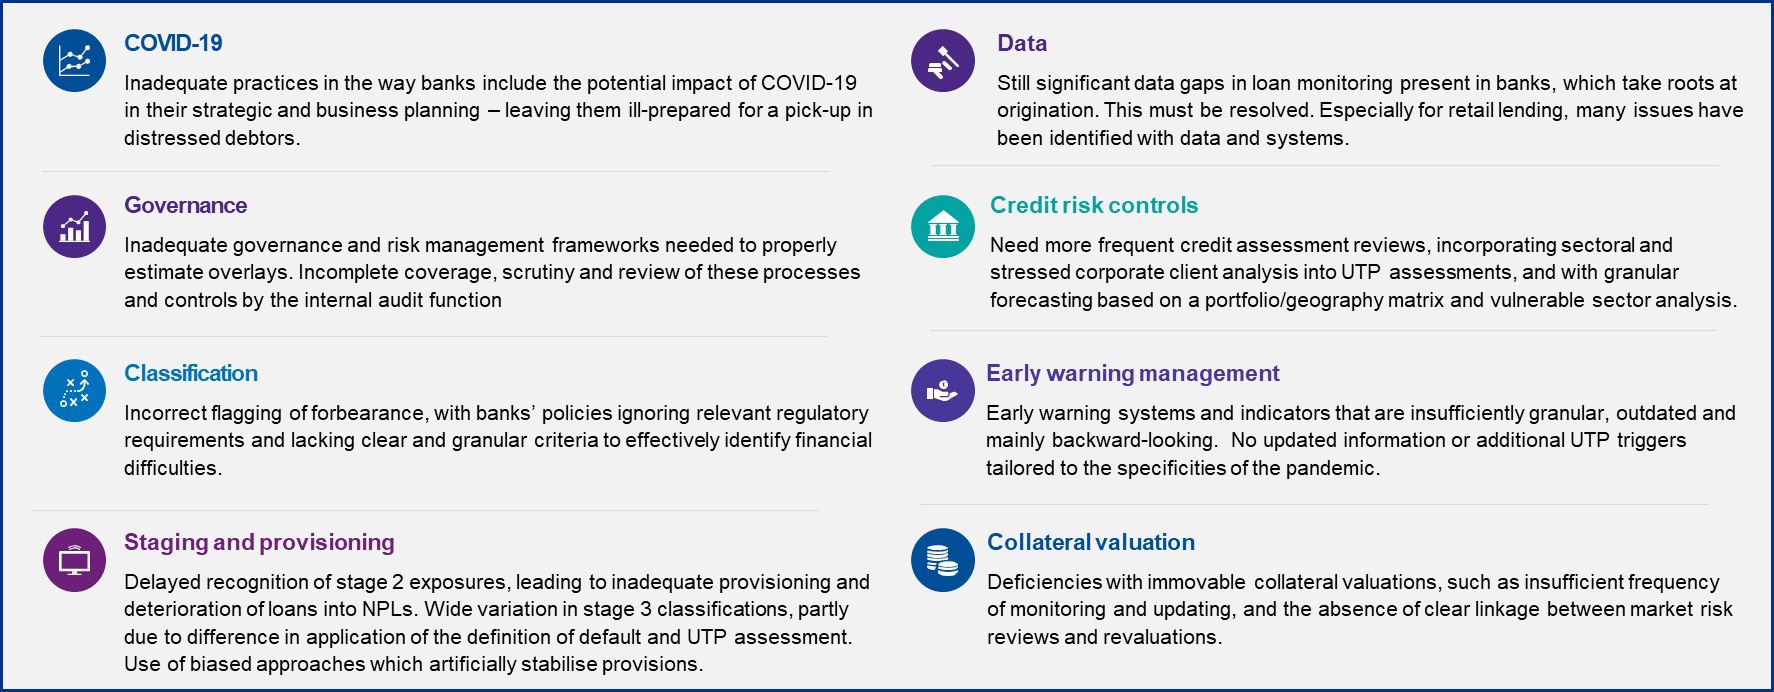 Figure 2: Deep dive into some of the credit risk management deficiencies identified in 2021